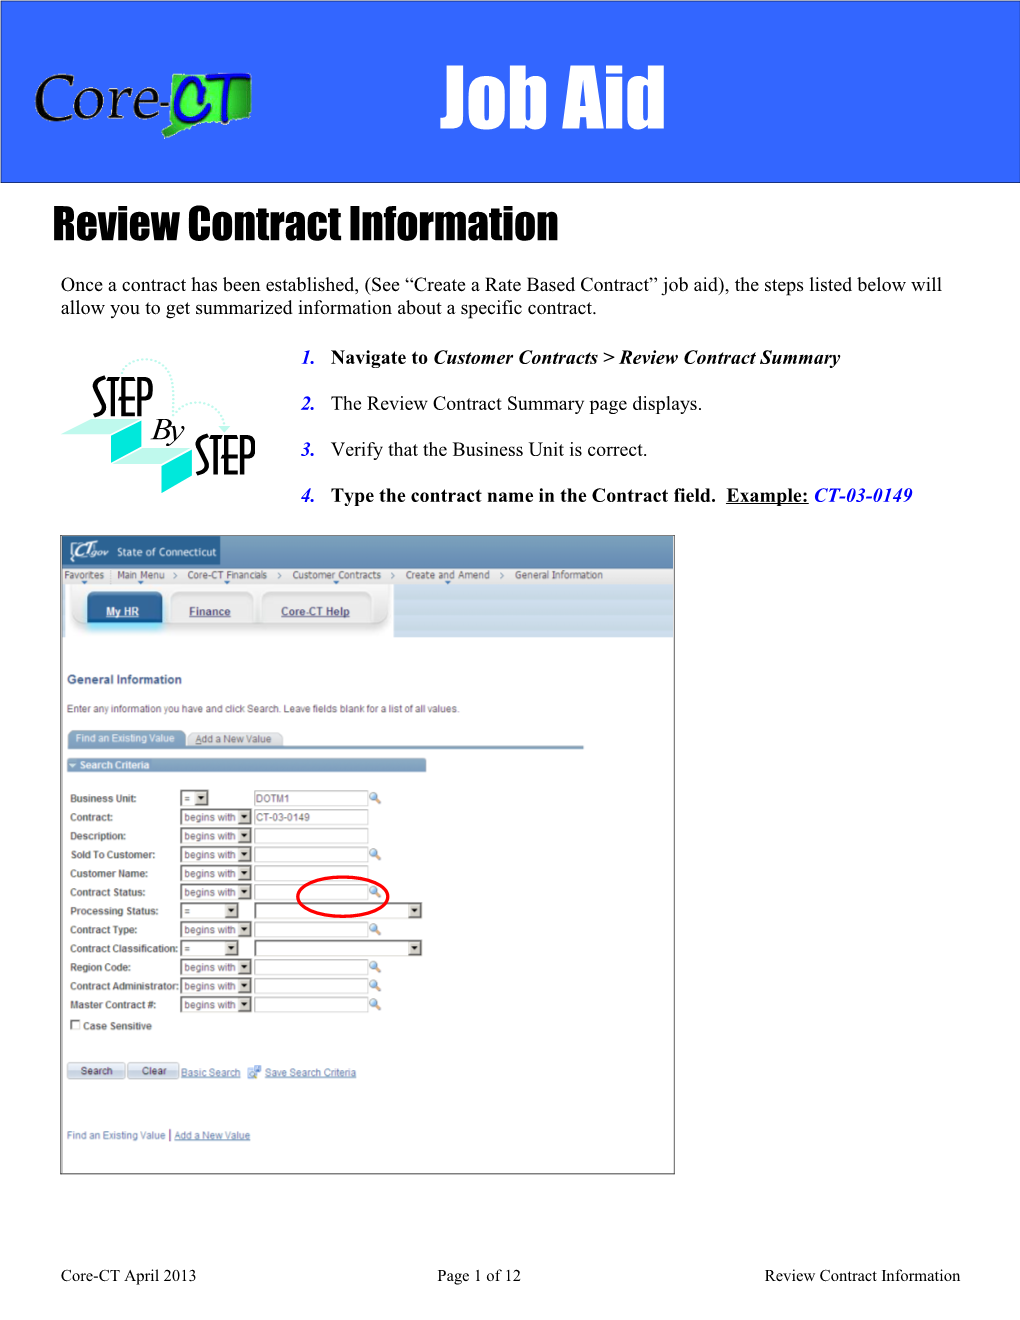 Review Contract Information